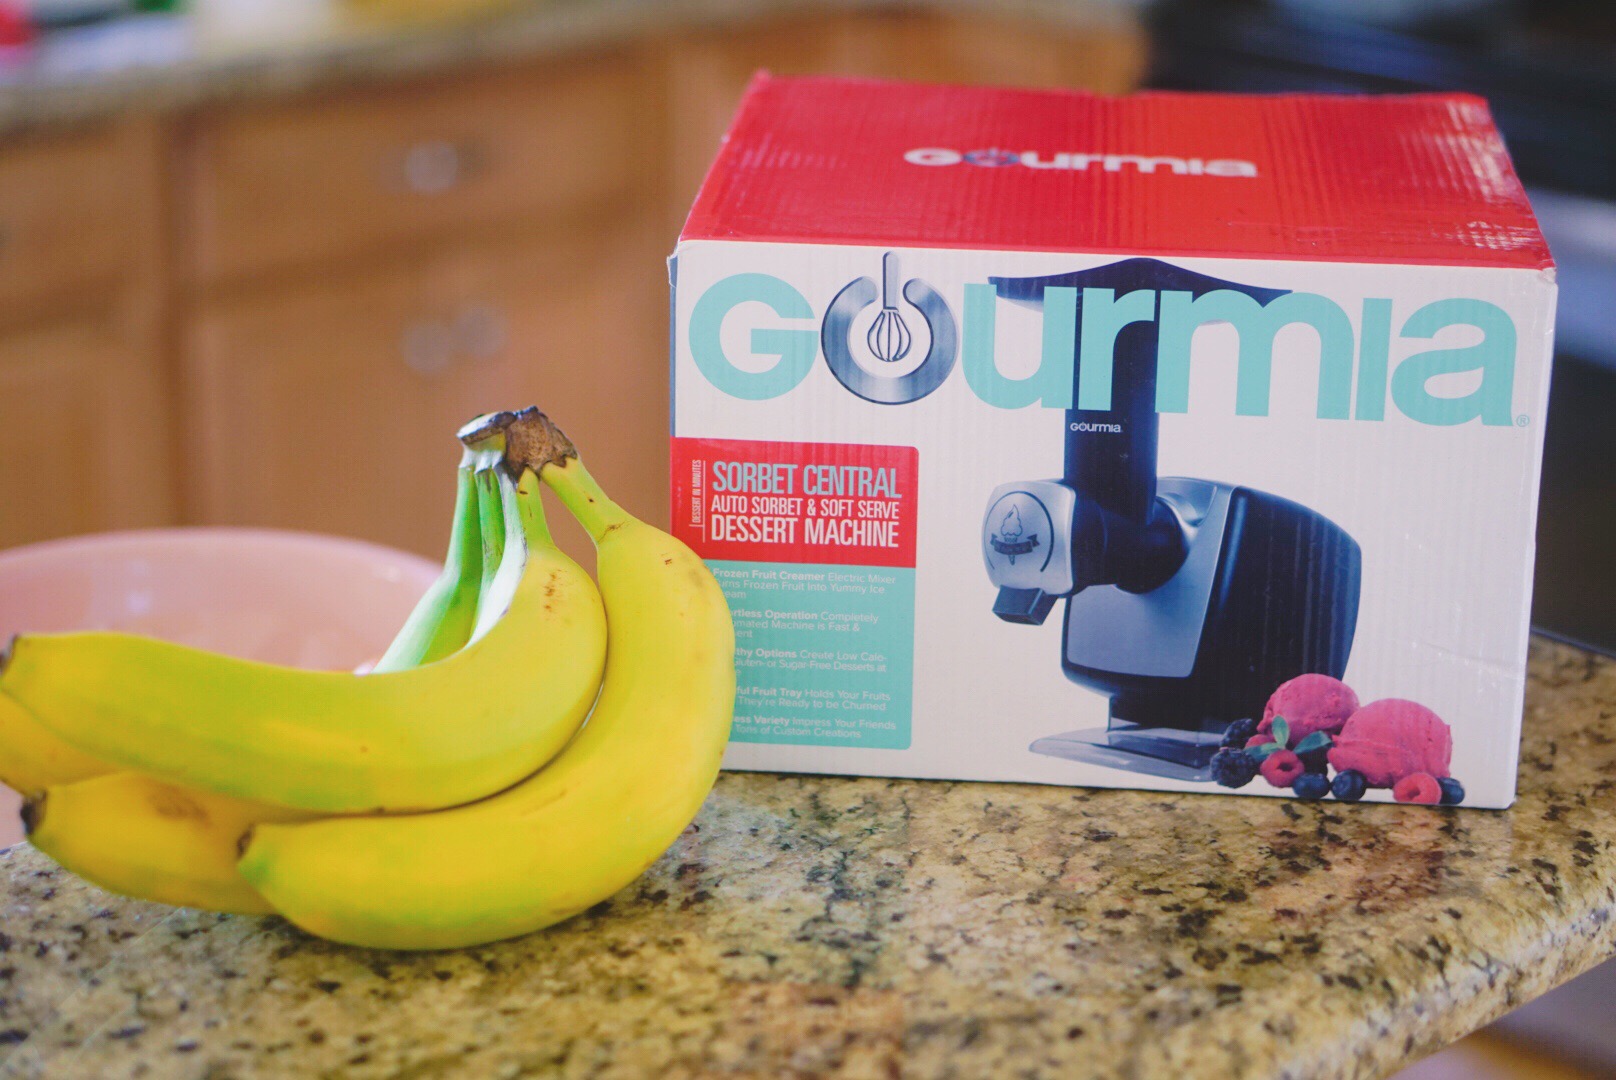 Kitchen Essentials - Gourmia Sorbet and Smoothie Maker - You Can Shop For no eBay - ebay home goods via Misty Nelson, lifestyle blogger ad parenting influencer mom at frostedblog @frostedevents 